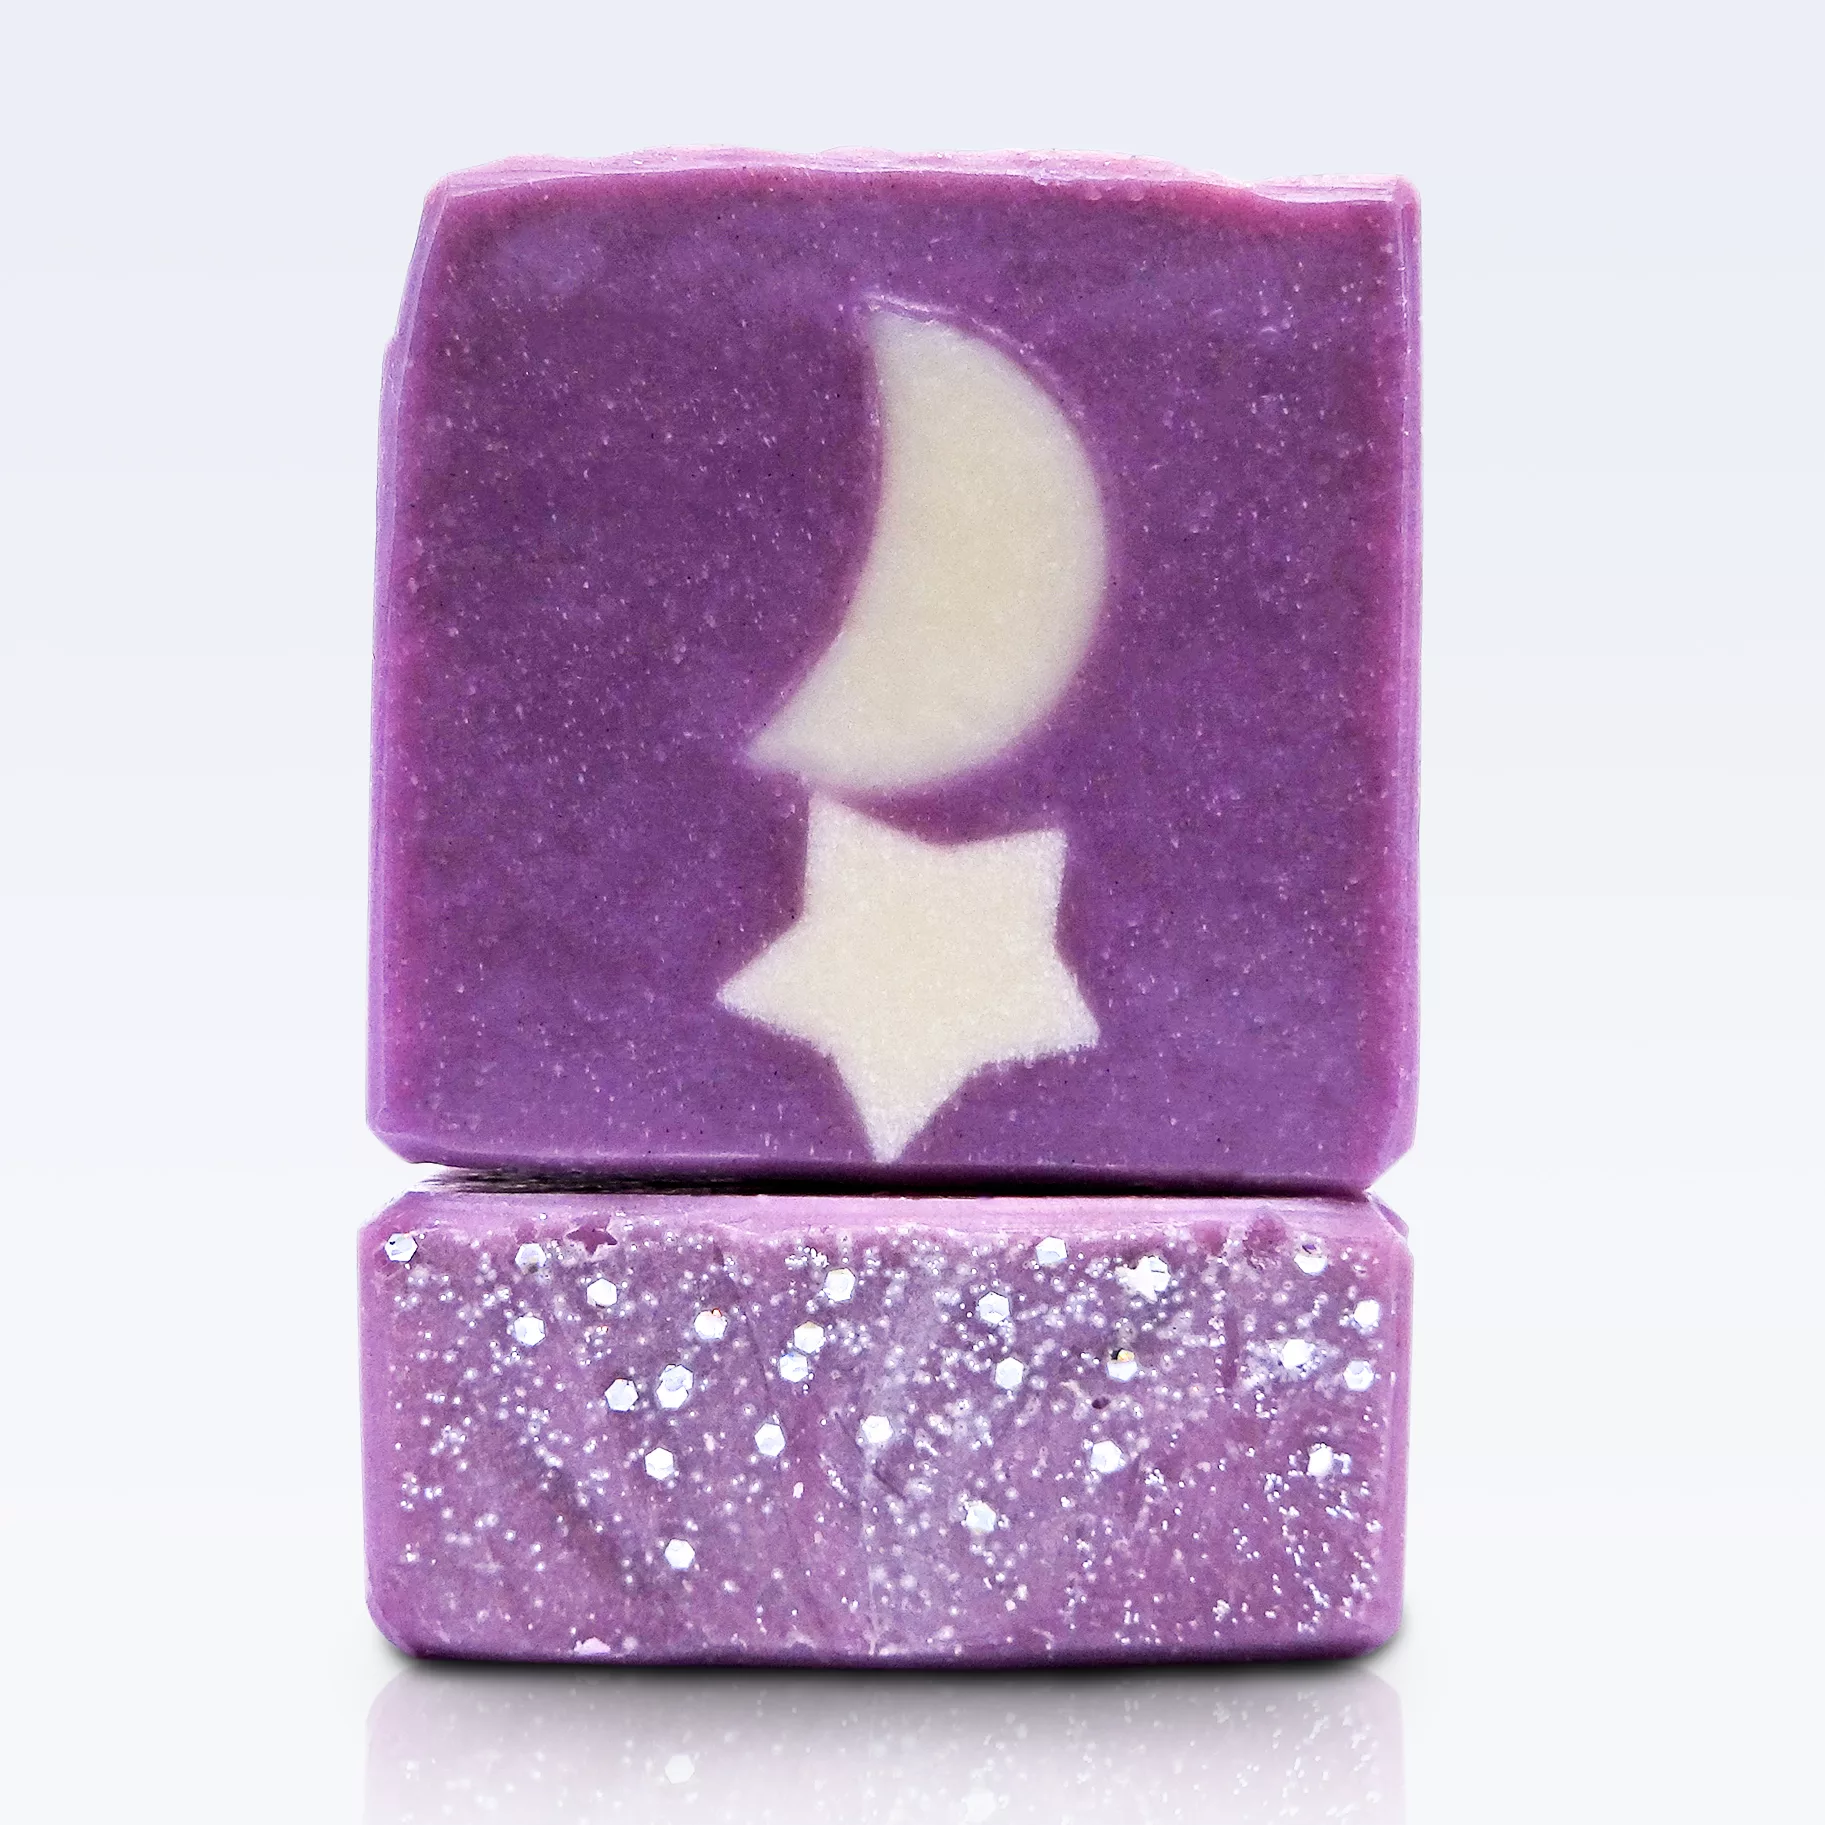 Galactic Grape handmade kids soap by Tubby Tabby Soaps (grape bubblegum fragrance with star and moon silhouettes and glitter)